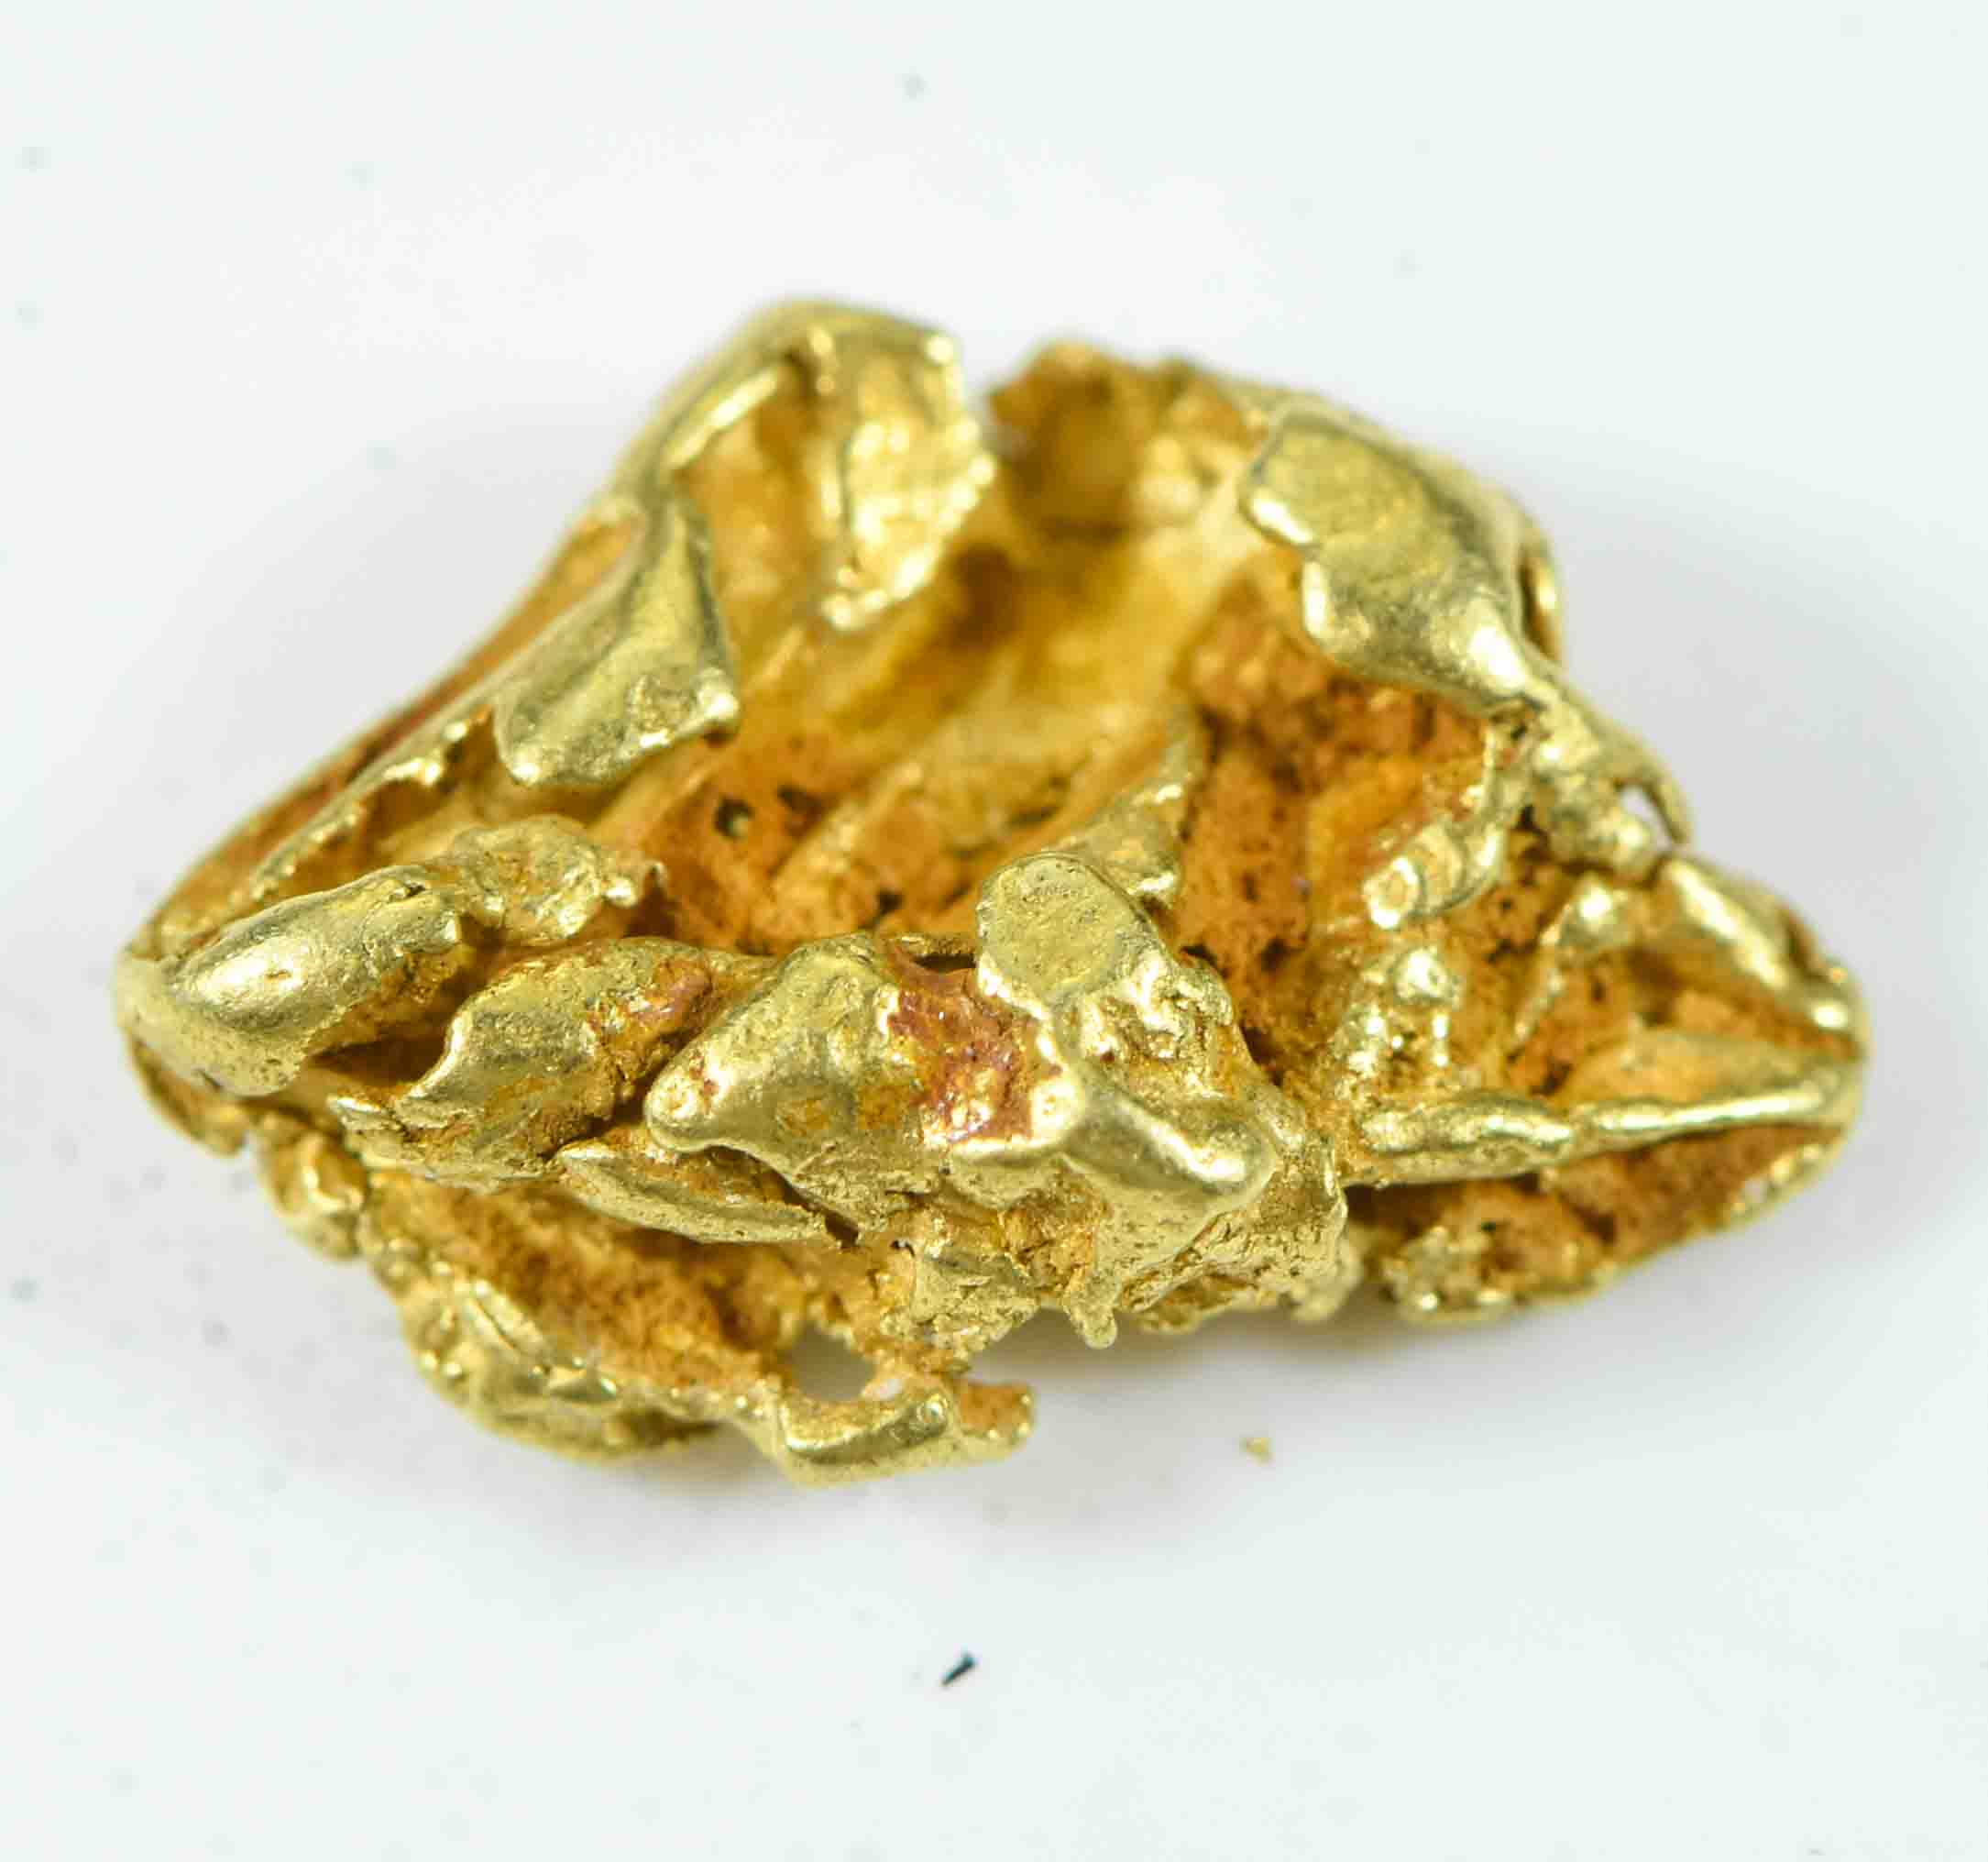 L-44 Alaskan BC Dendritic Exotic Shaped Gold Nugget "Special Collection" .87 Grams